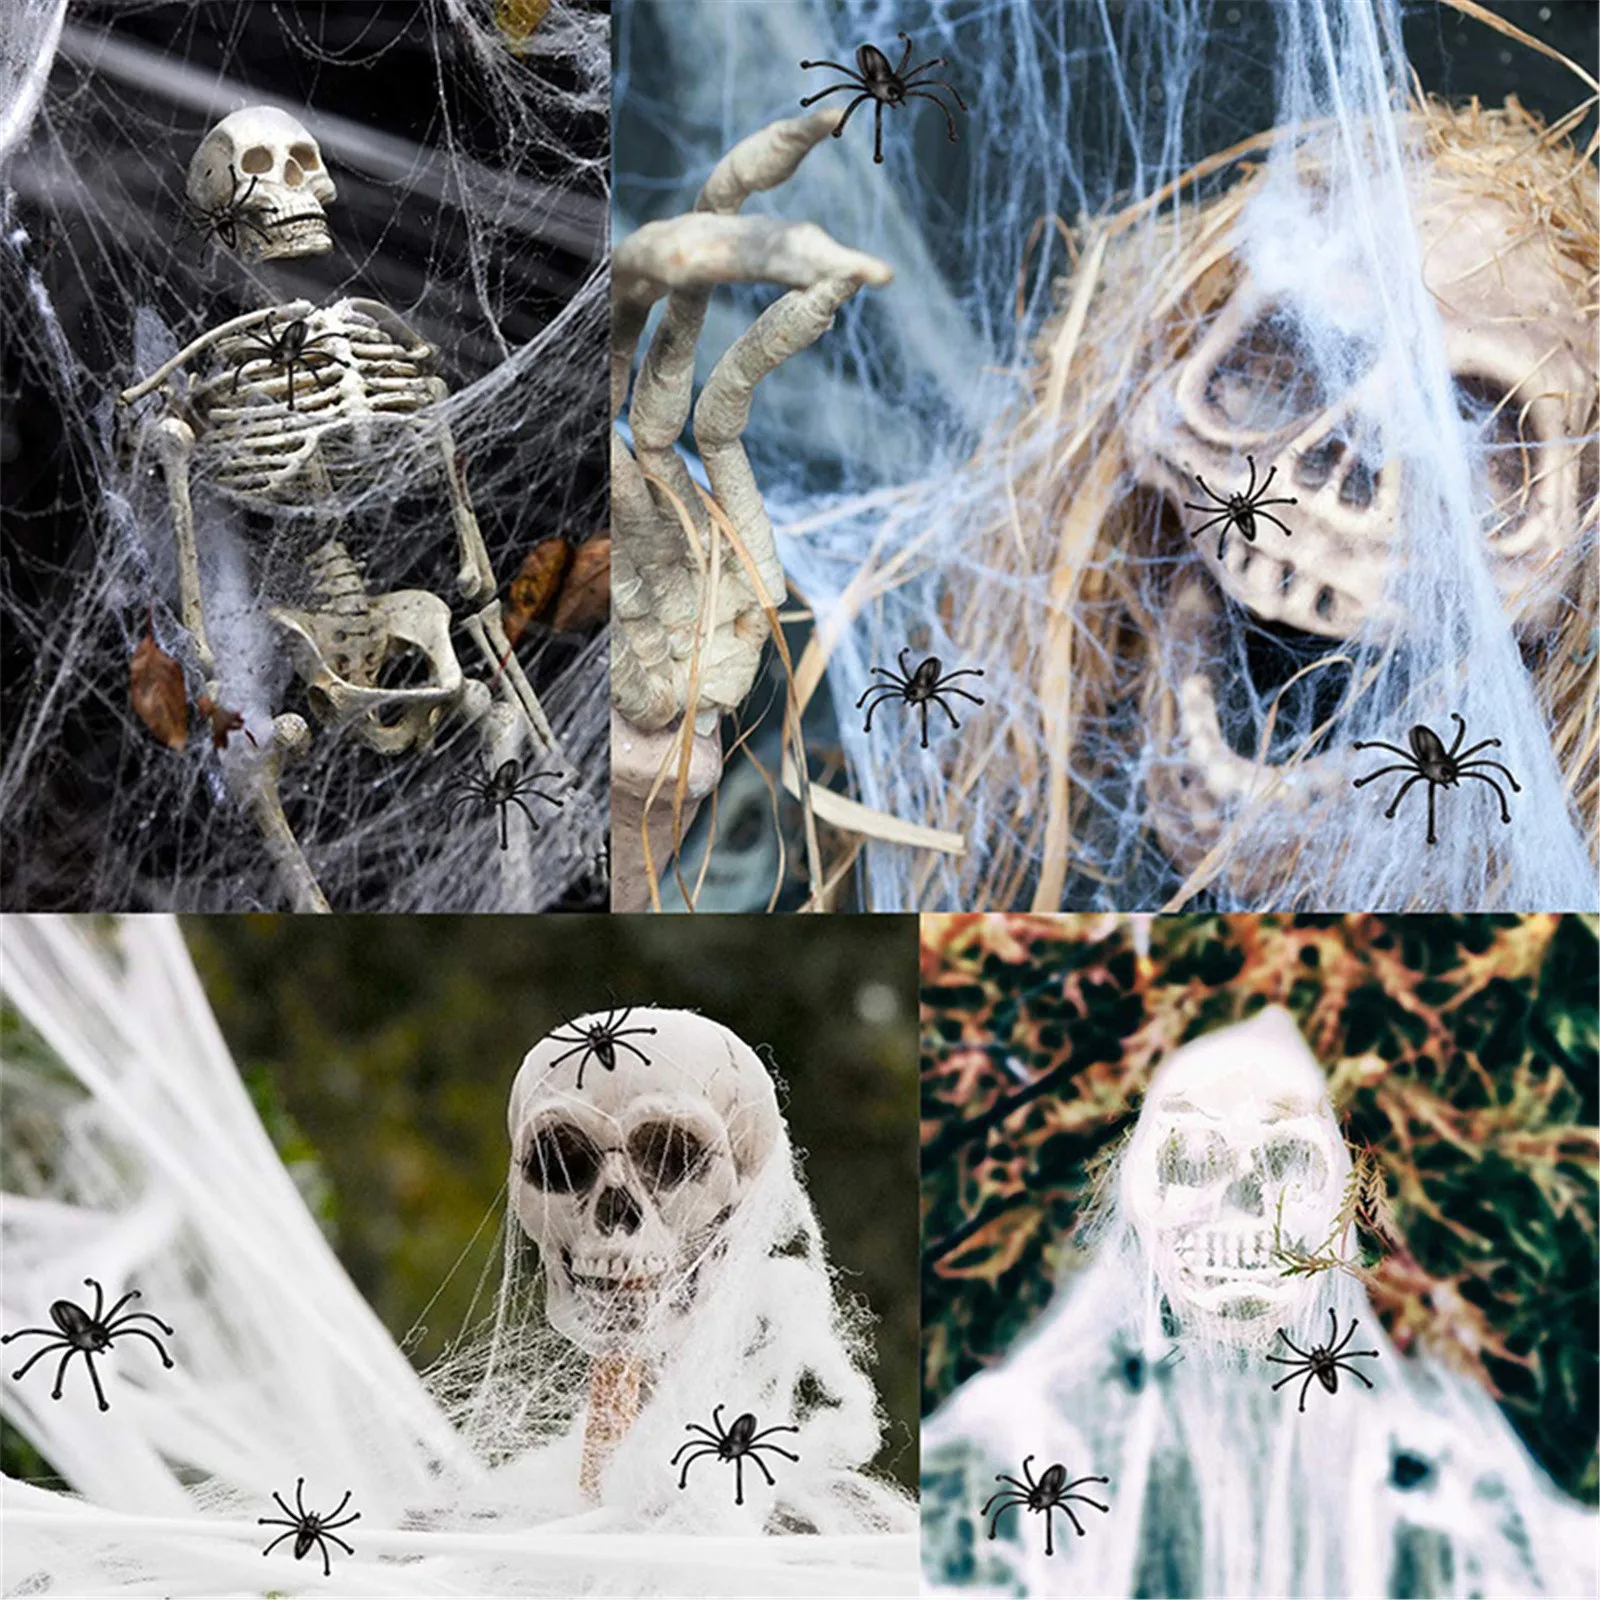 

Halloween Decorations Artificial Spider Web Stretchy Cobweb Scary Party Halloween Decoration for Bar Haunted House Scene Props